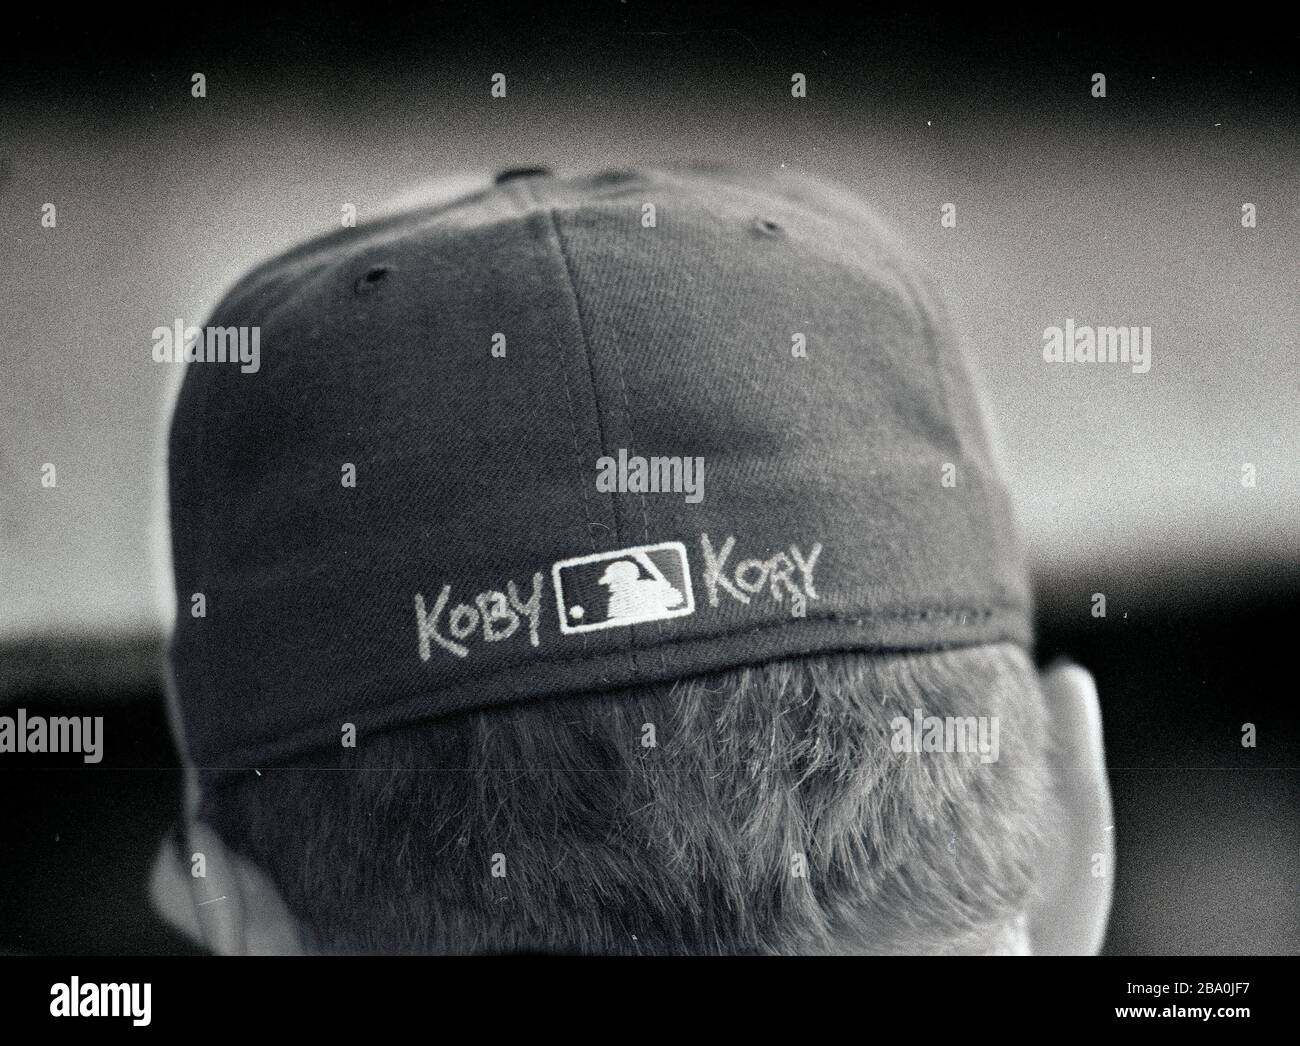 Boston Red Sox pitcher Roger Clemens wrote the names of his children on his cap as a tribute Fenway Park in Boston Ma USA 1990’s  photo by bill belknap Stock Photo